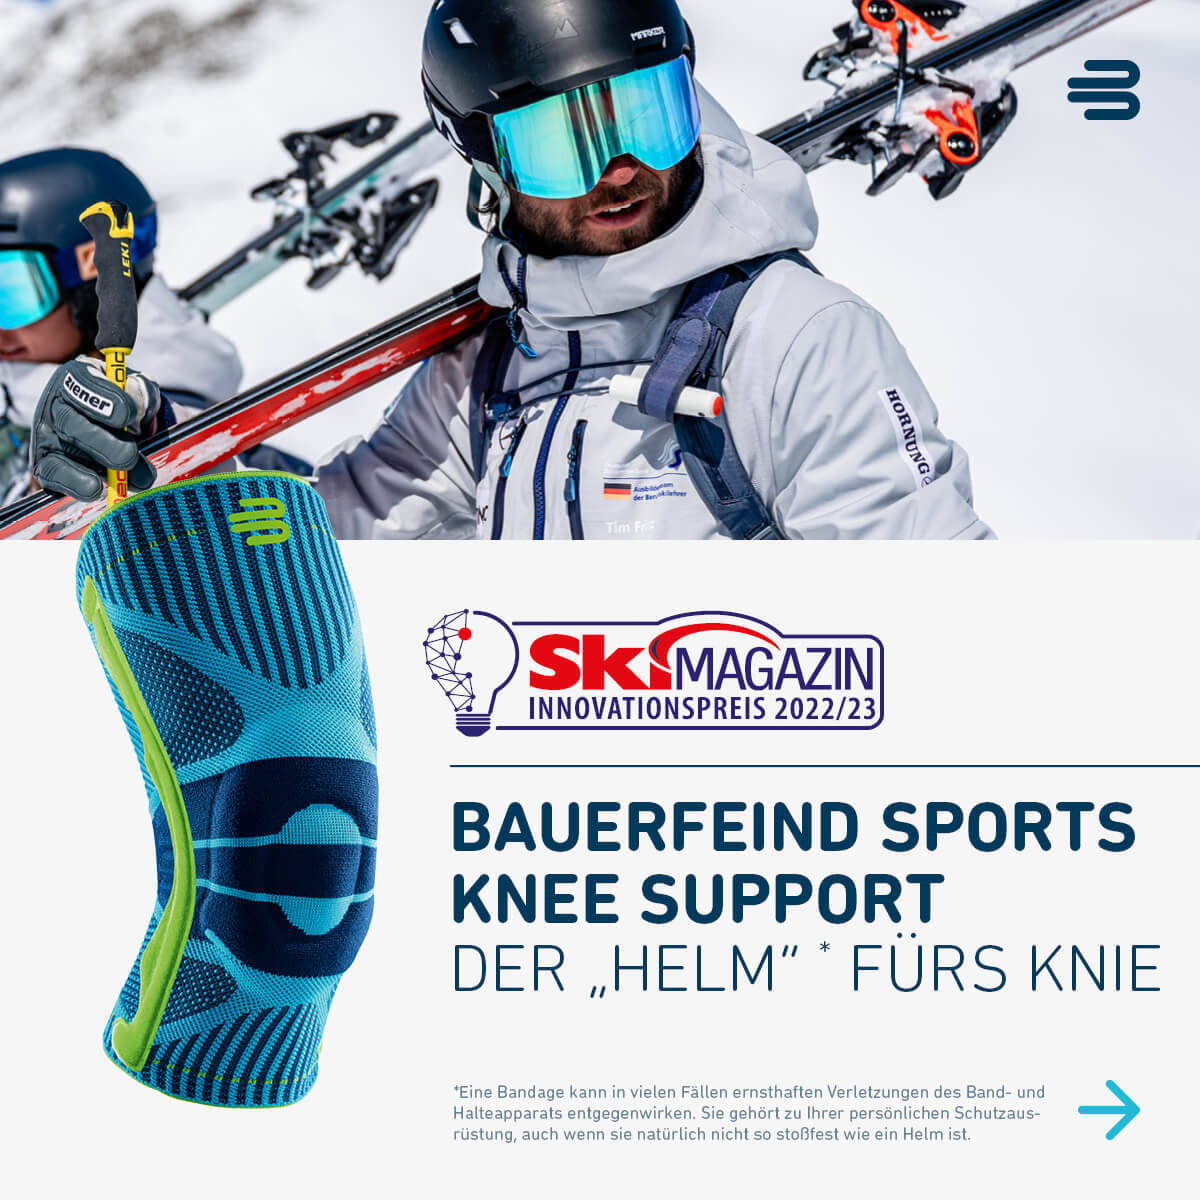 Image collage: Skiers wear his skis on the shoulder at the top and knee band with award logo and text below